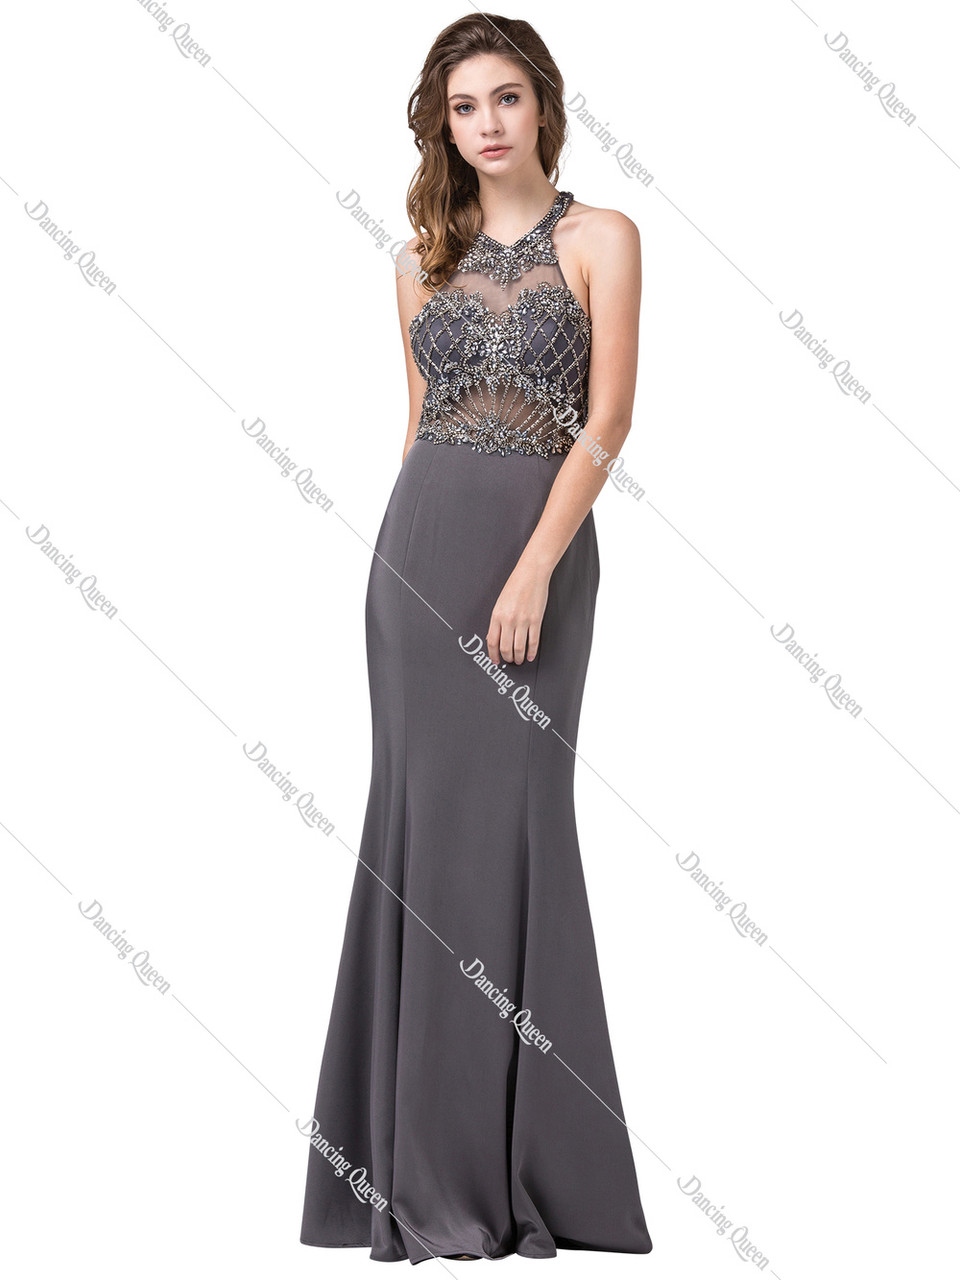 Buy Mac Duggal Bead-embellished Halter Gown - Silver At 25% Off |  Editorialist